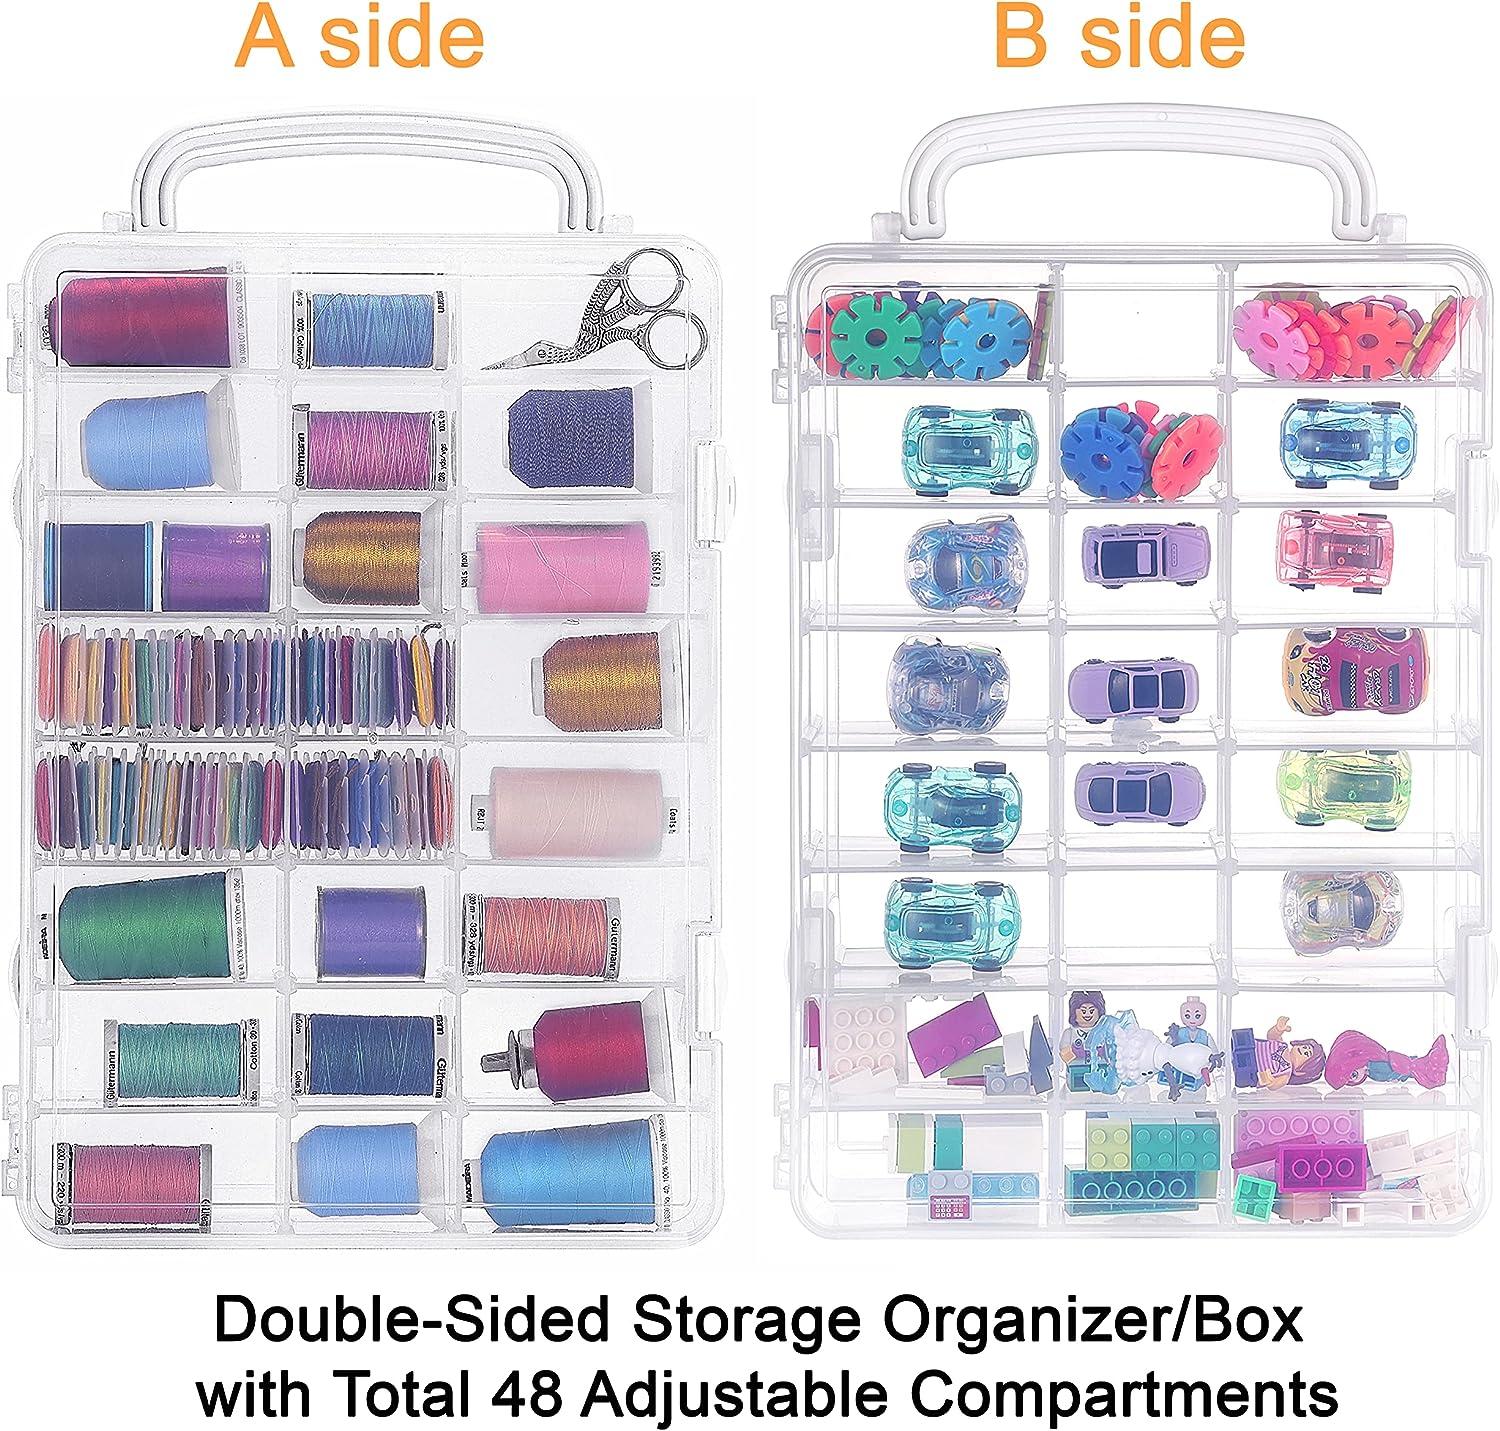 New brothread 3 Layers Stackable Clear Storage Box/Organizer for Holdi